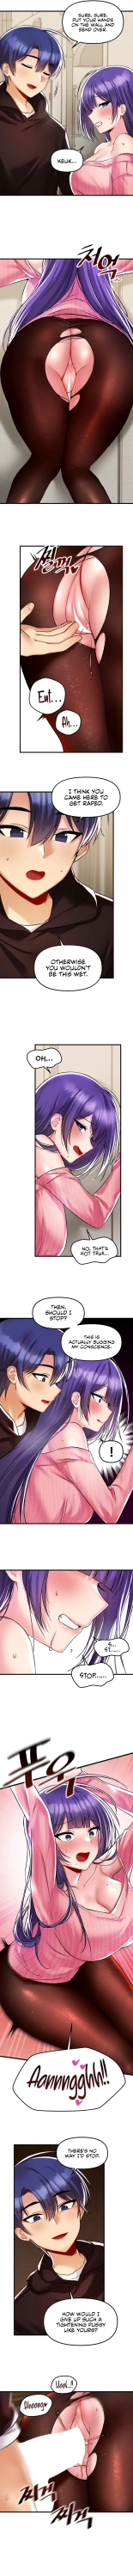 Trapped in the Academy's Eroge : page 300